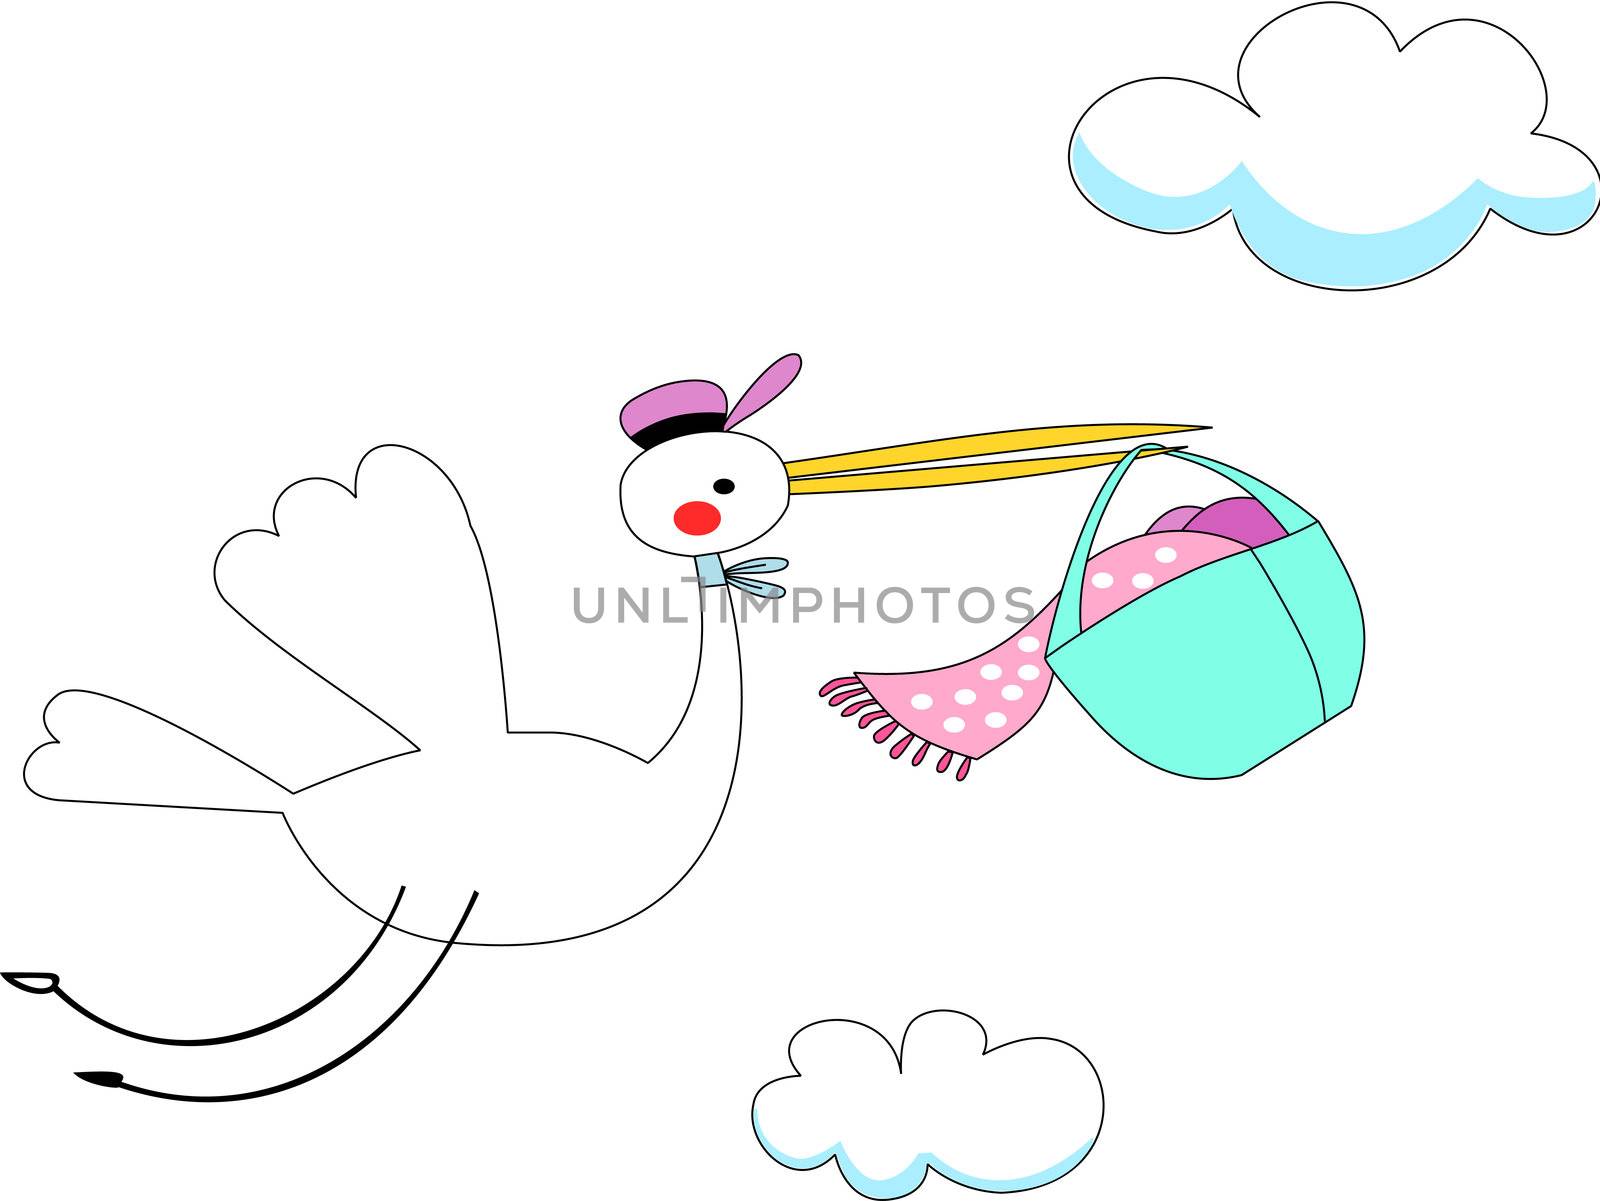 White large stork with long yellow stout bills carries baby wrapped in pink sheets inside a blue basket.